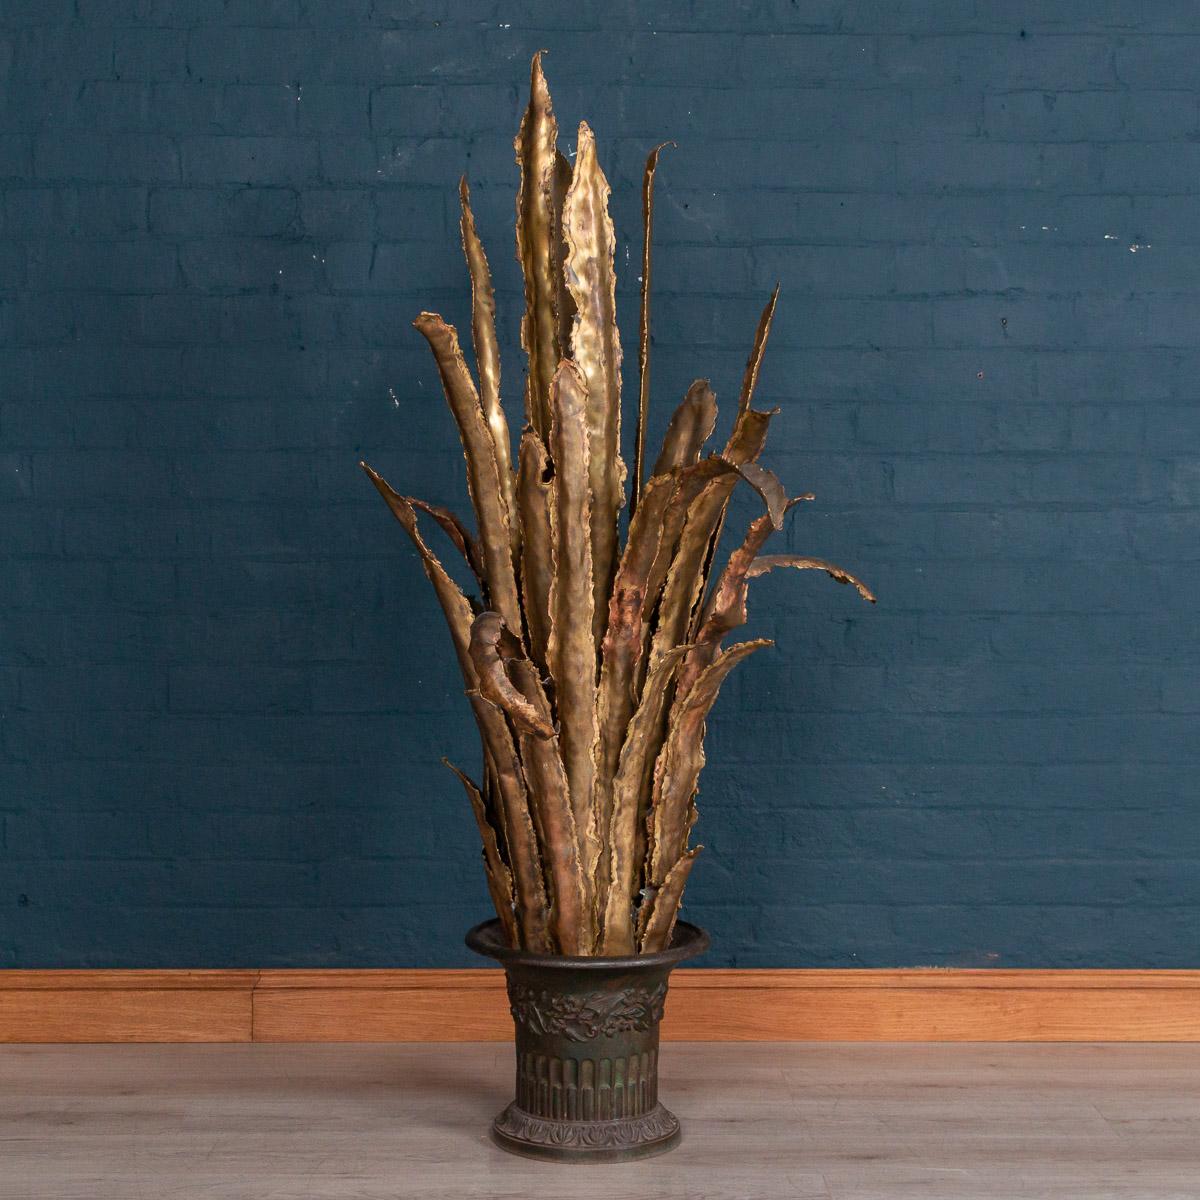 A wonderful and very decorative floor lamp in the form of a Sansevieria, with one light point in the middle at the base of the lamp. Extremely good quality and exceptionally well finished it would make a superb addition to any interior both modern